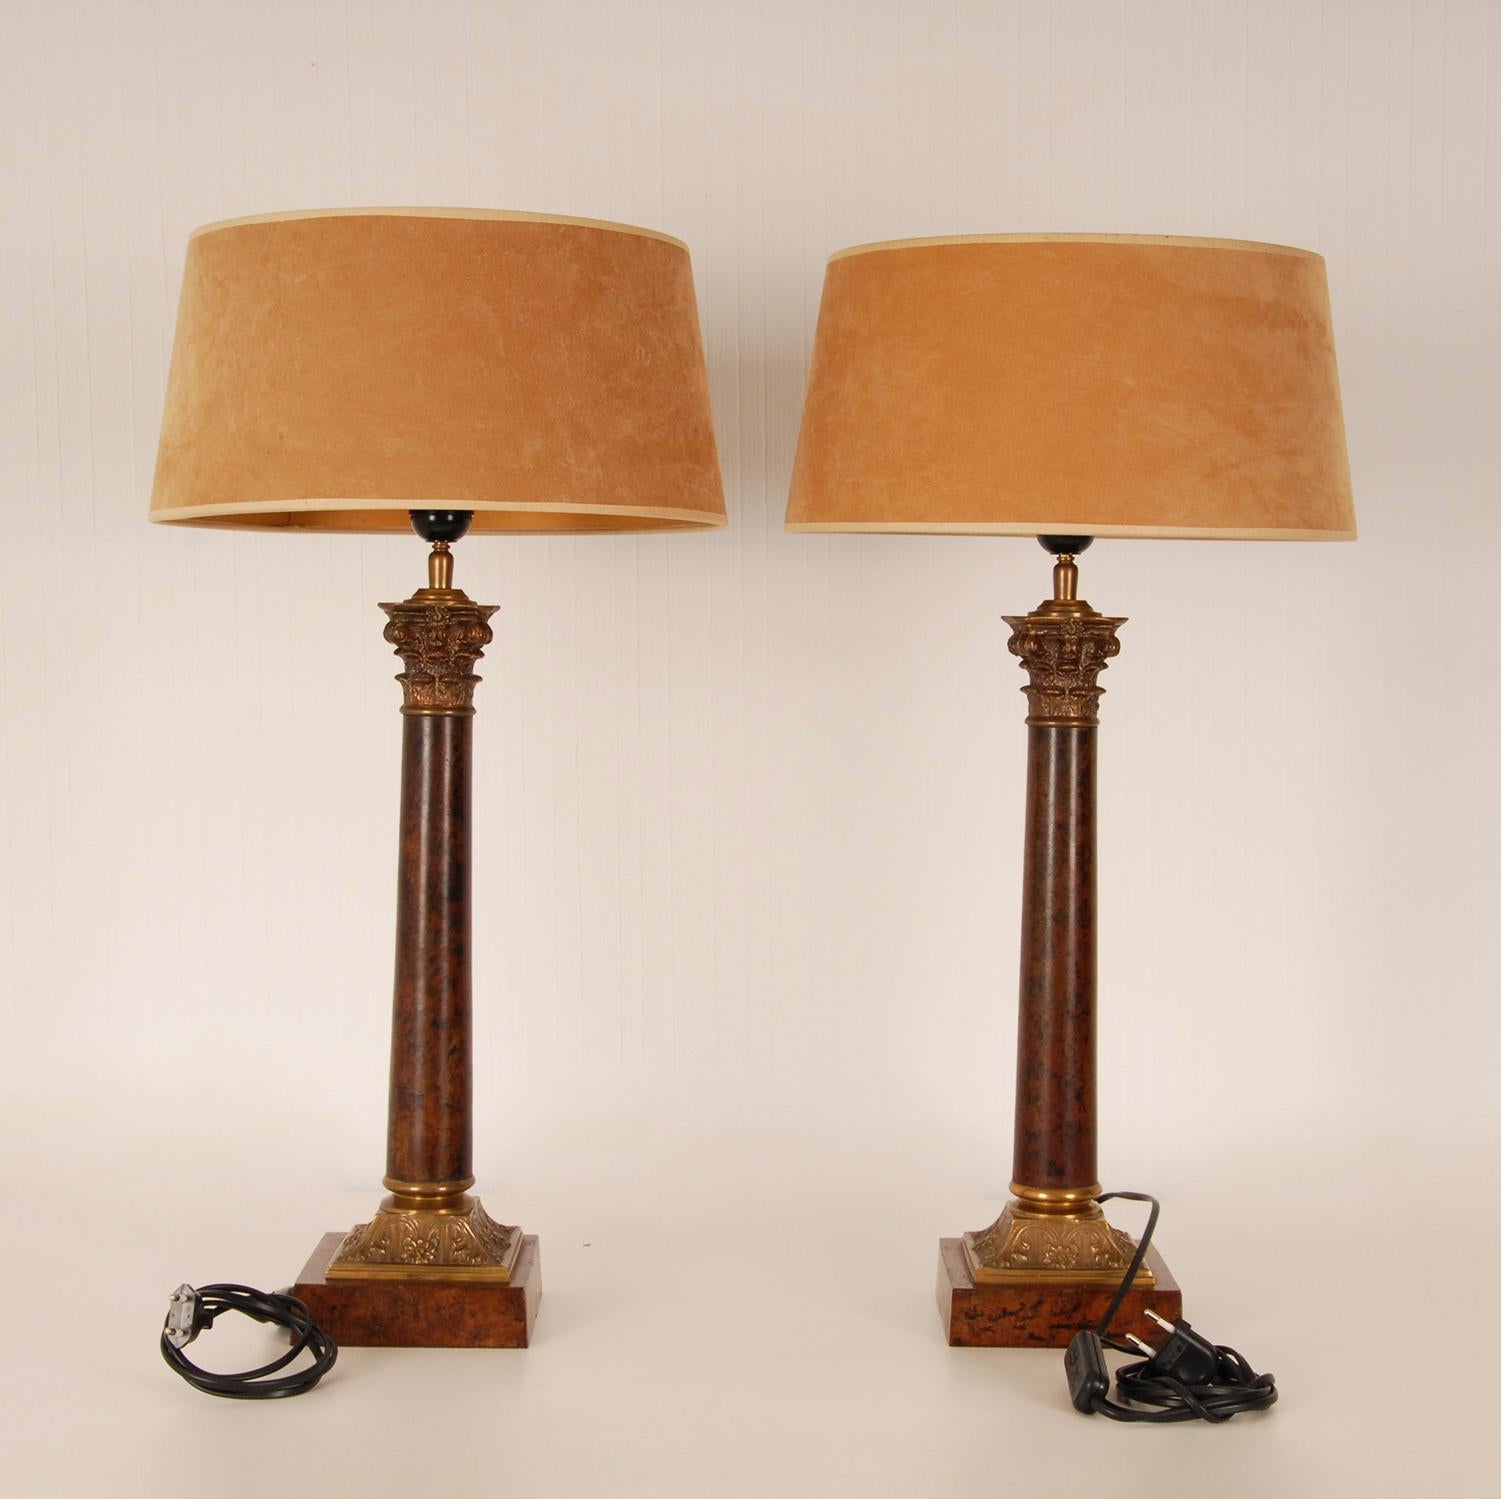 Empire Napoleonic Style Table Lamps 
Patinated and Gilt Bronze and brass Corinthian Column Lamps
Vintage and made in the manner of E.F. Caldwell
Origin France 1970 -1979, Light bulb E27, black cord contains a on - off switch
The lampshades are